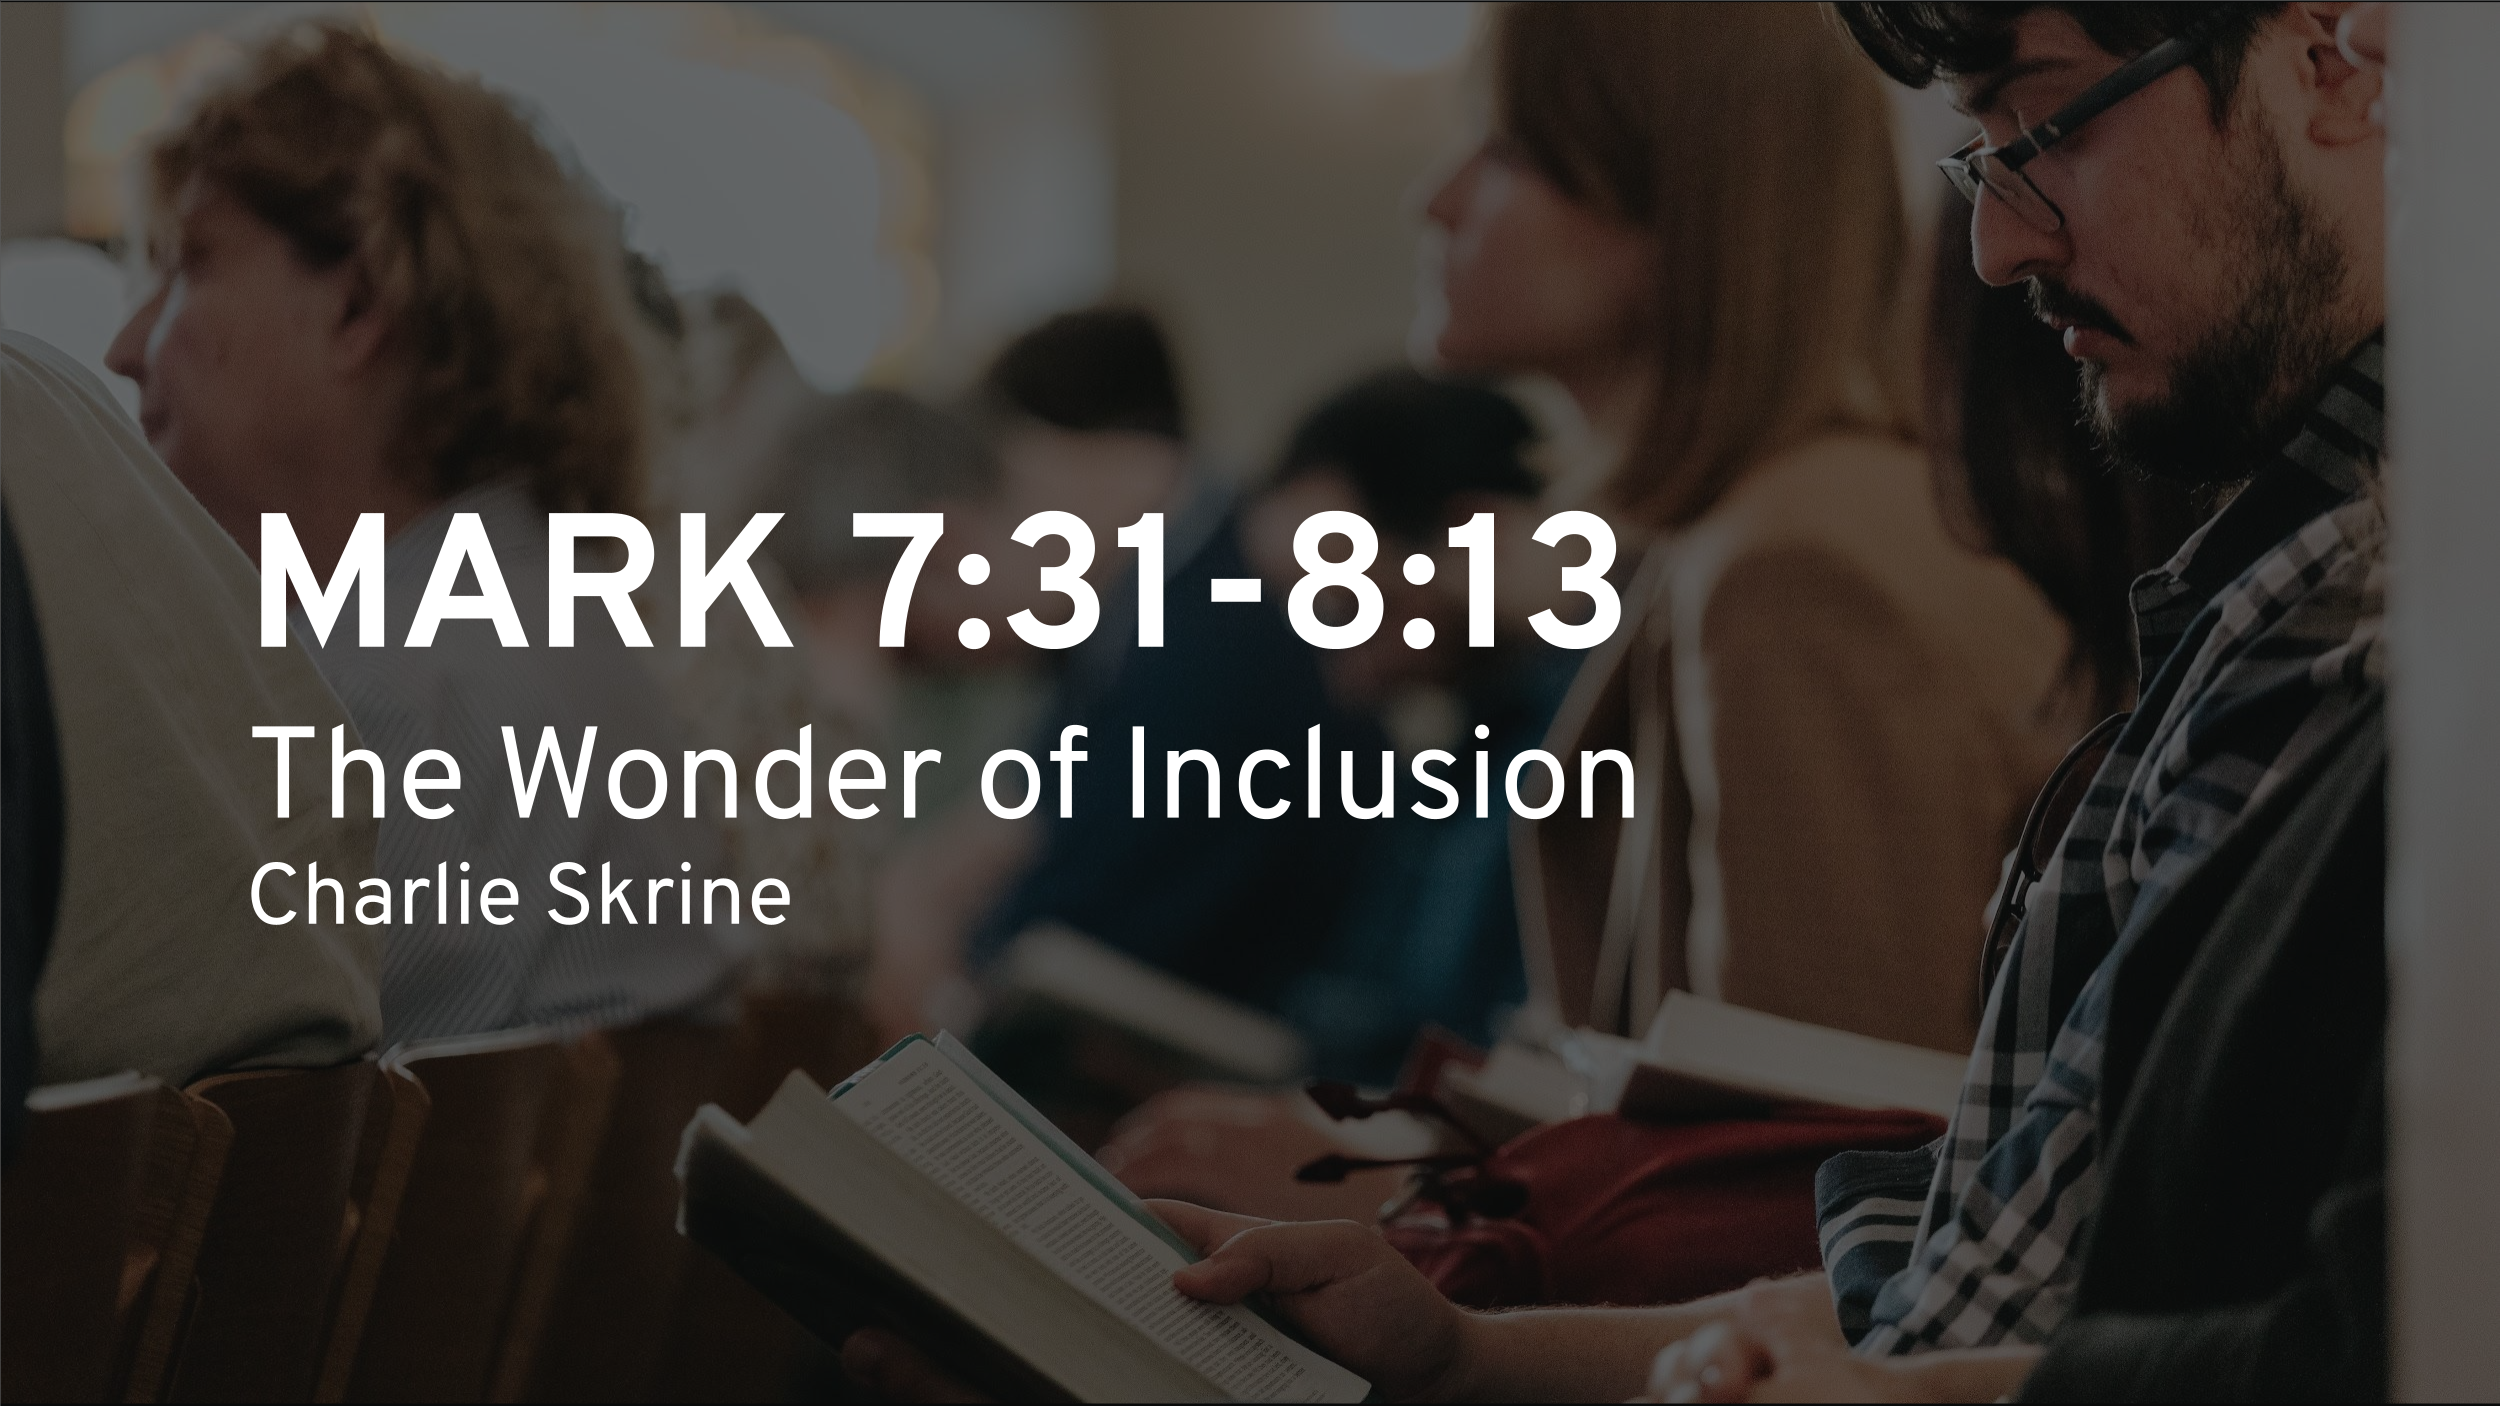 The Wonder of Inclusion